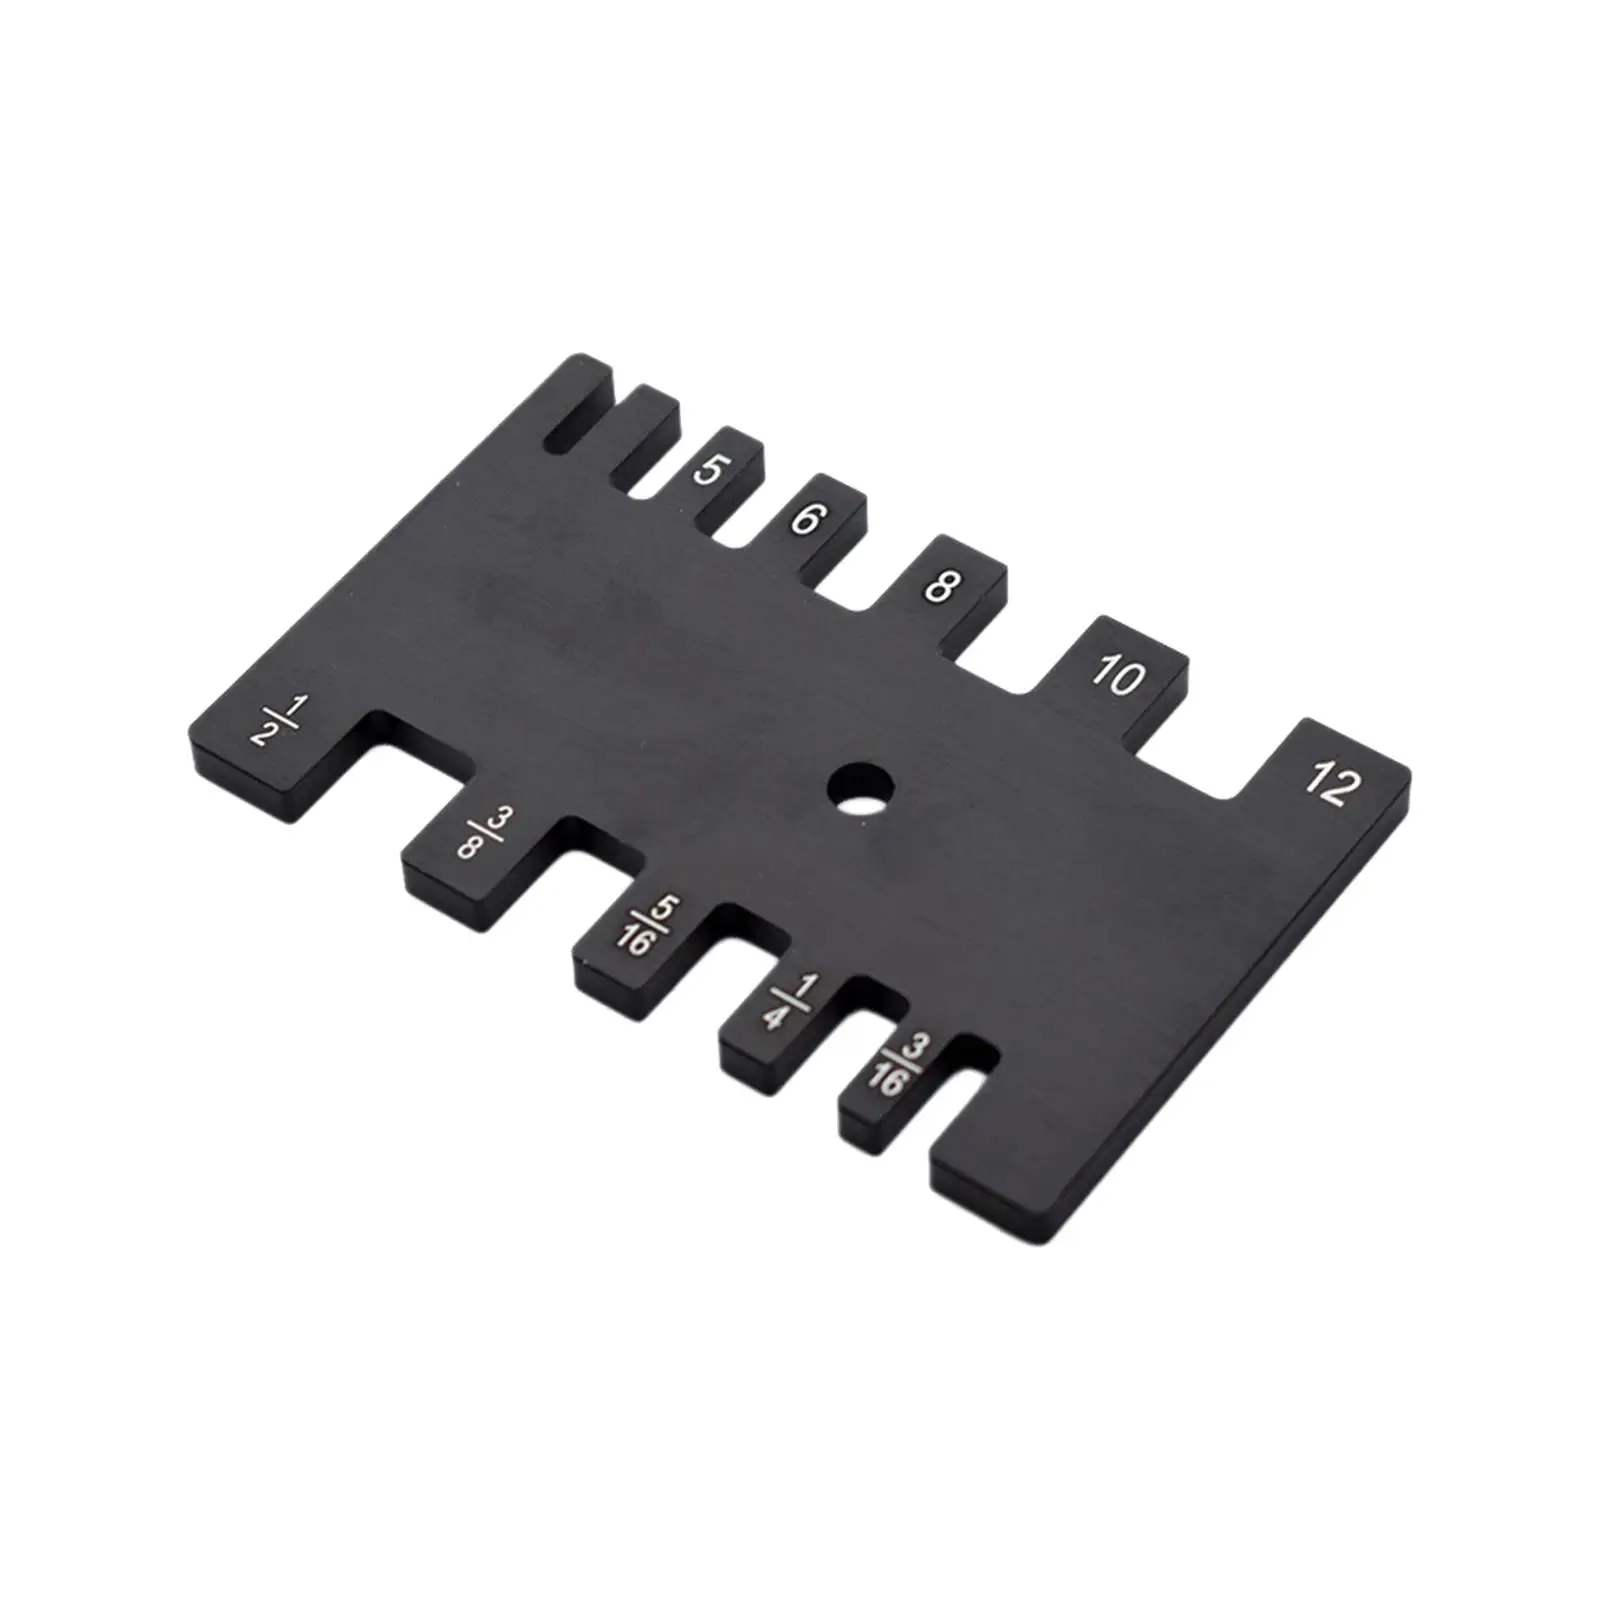 Aluminium Router Table Insert Plate Router Templates Gauge Guide Multifunctional Sliding Brackets for Trimming Machine Tool